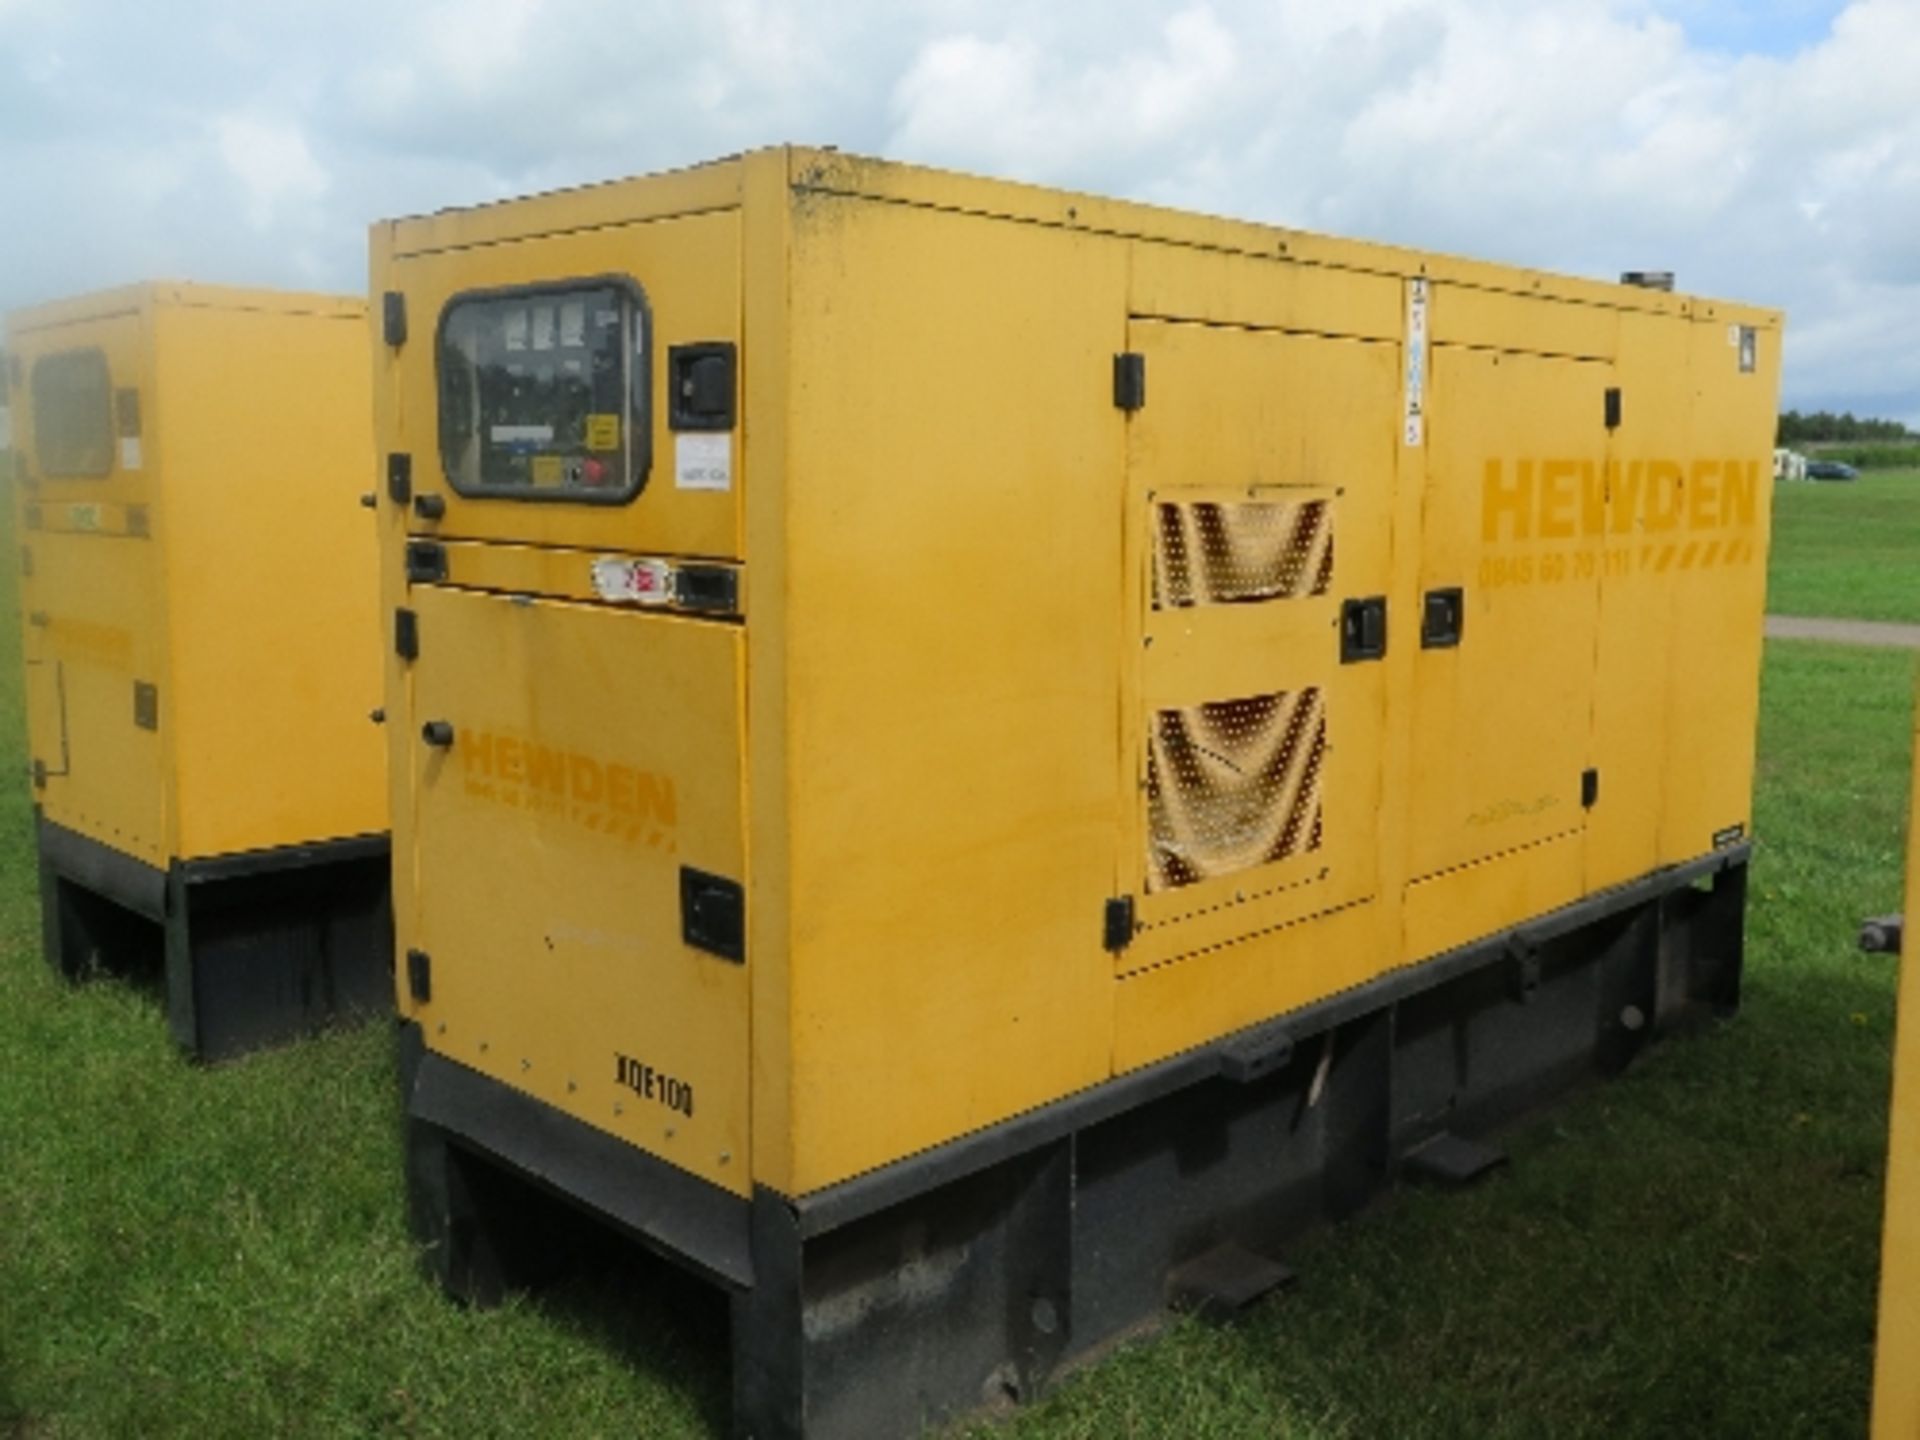 Caterpillar XQE100 generator 15066 hrs 158066
PERKINS - RUNS AND MAKES POWER
ALL LOTS are SOLD